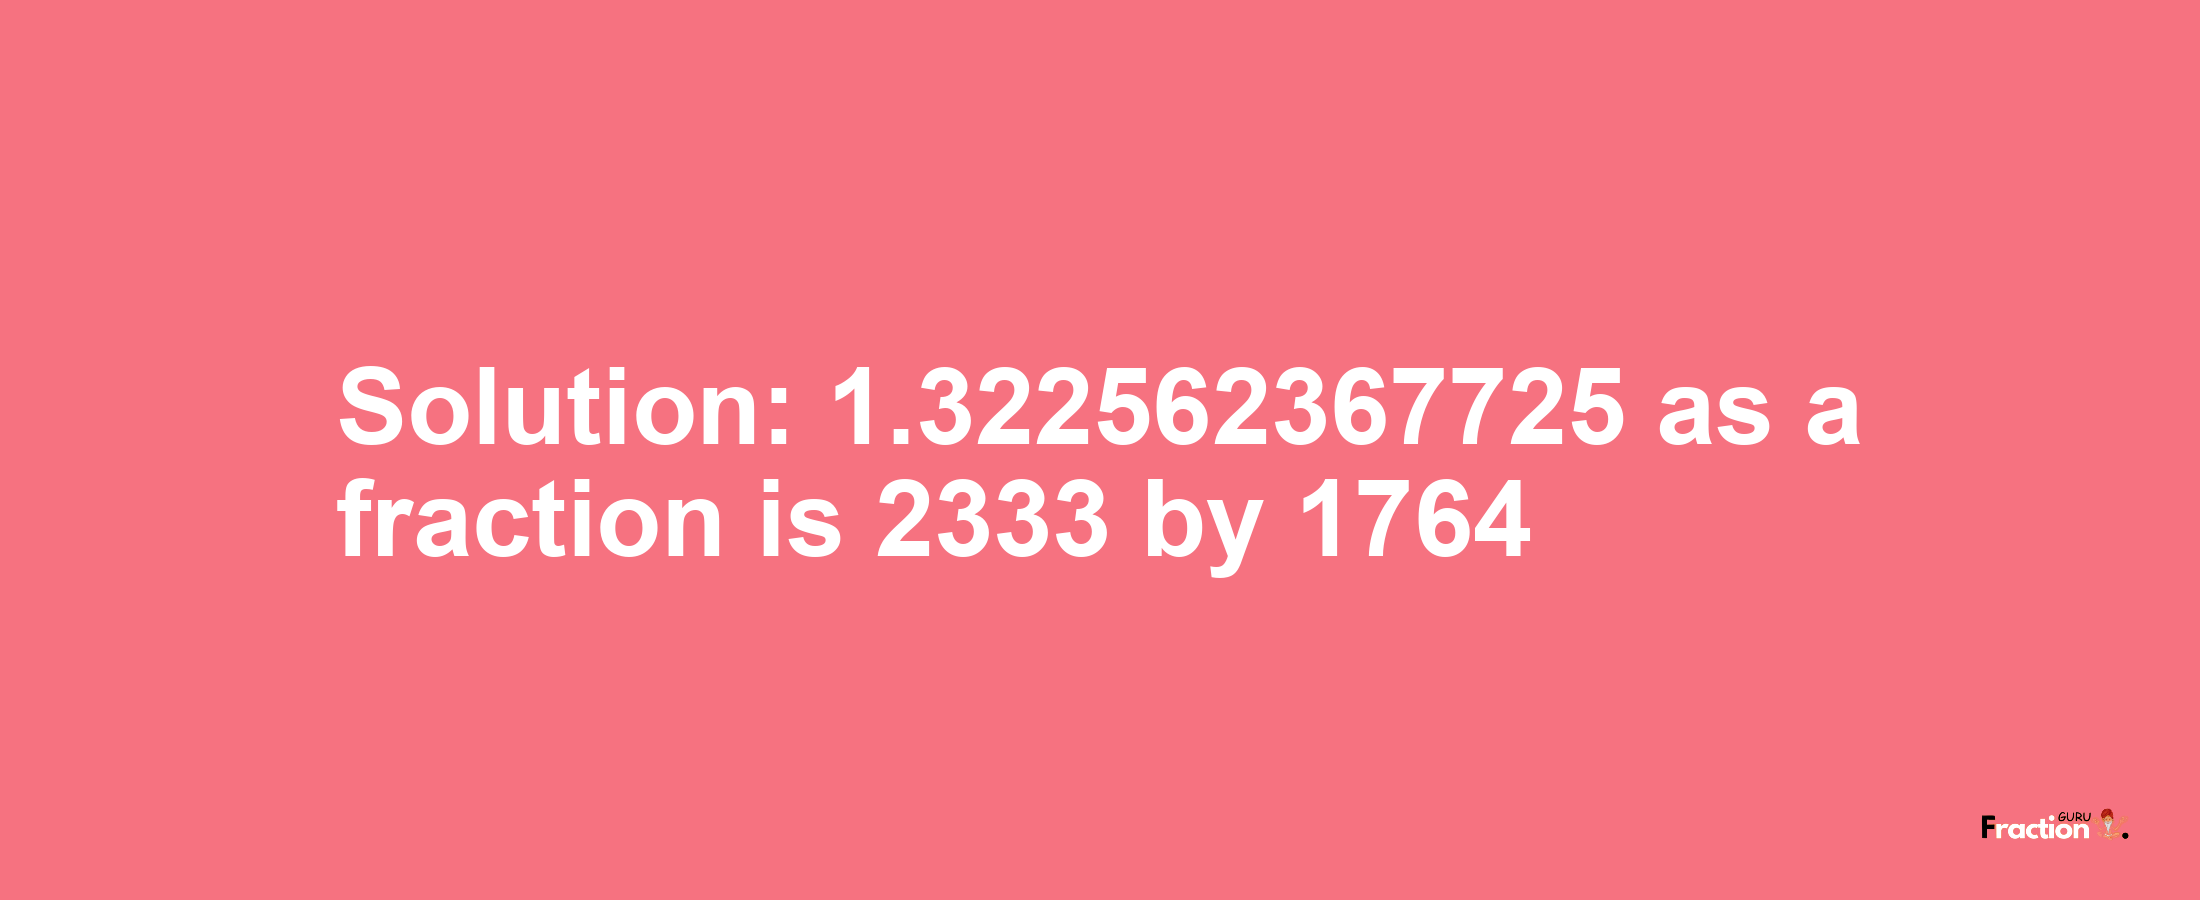 Solution:1.322562367725 as a fraction is 2333/1764